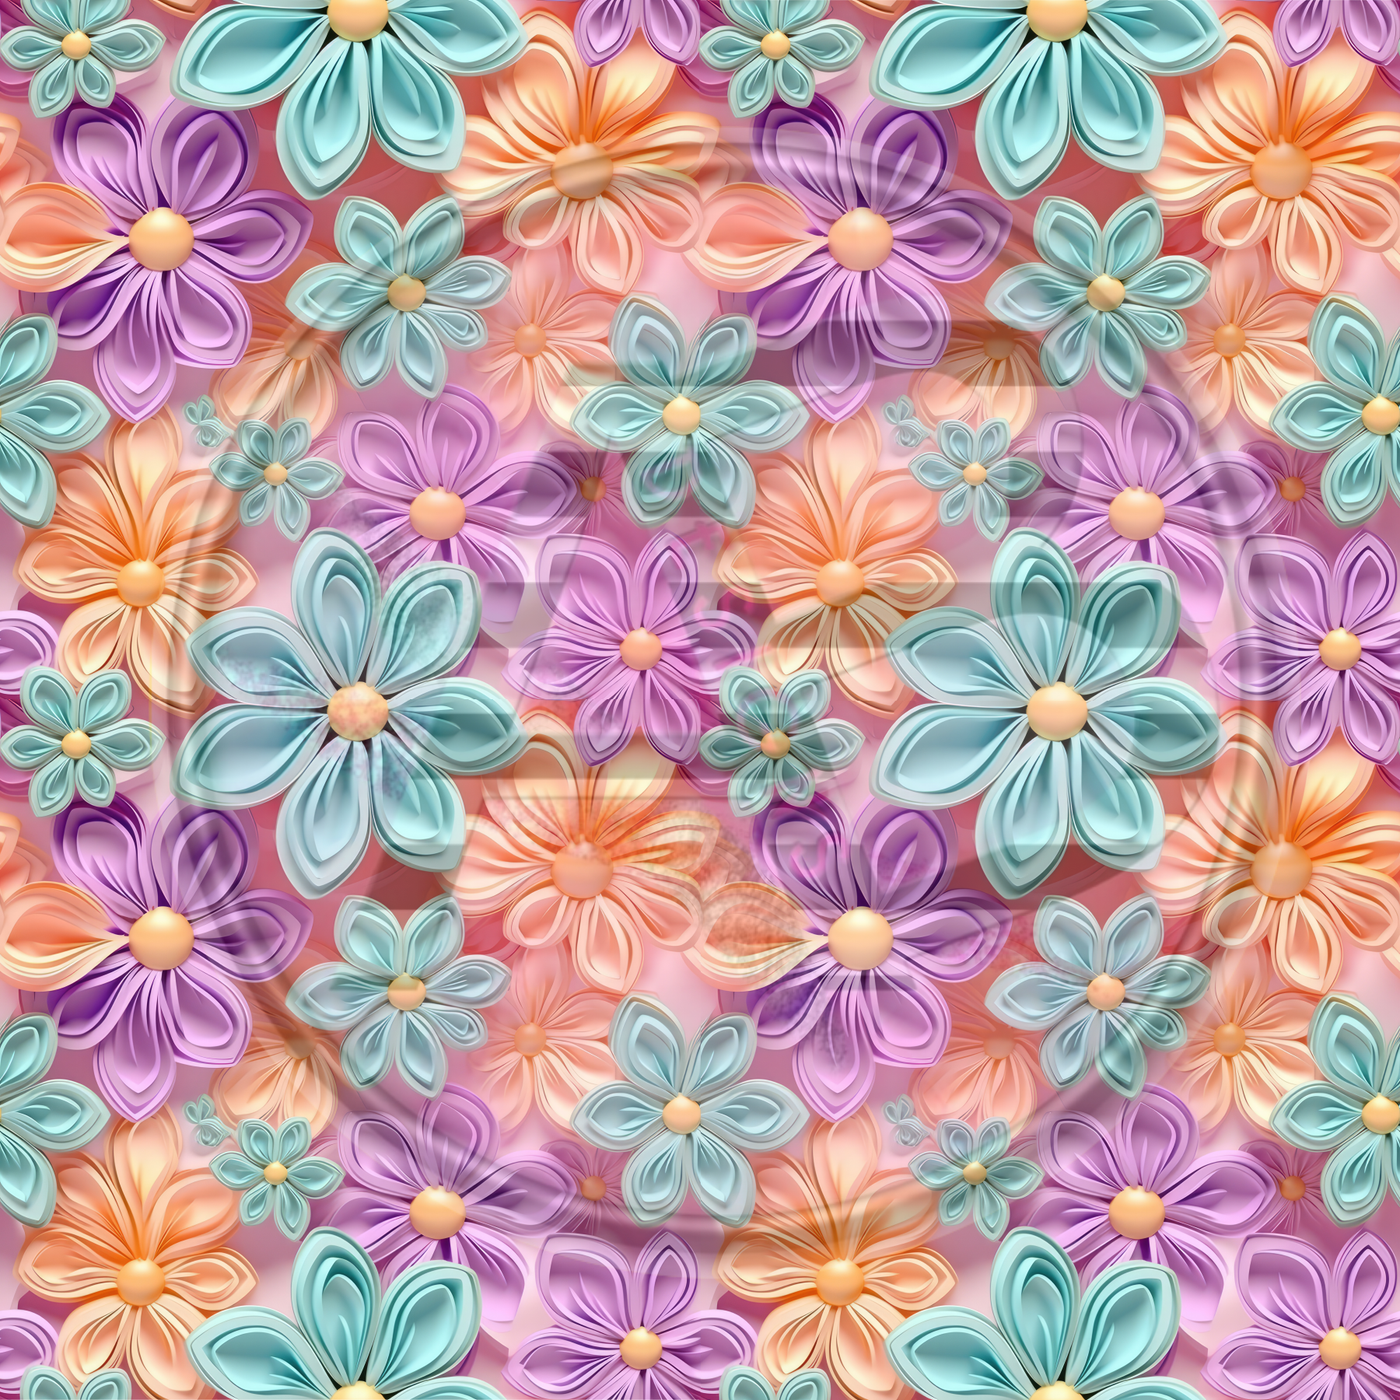 Adhesive Patterned Vinyl - 3D Floral 02 Smaller